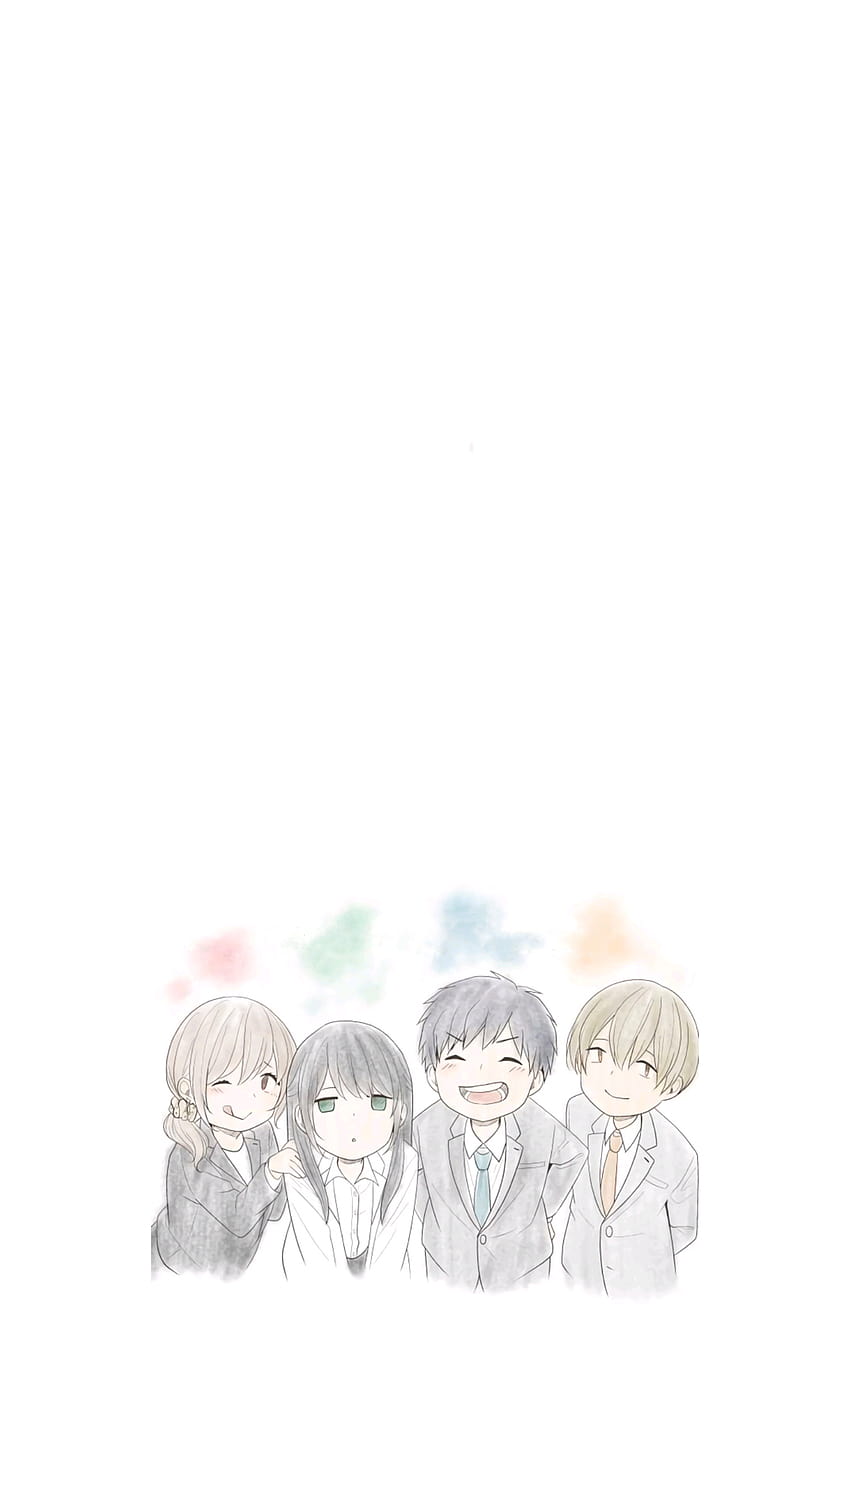 1 Anime Relife, relife anime iphone HD phone wallpaper